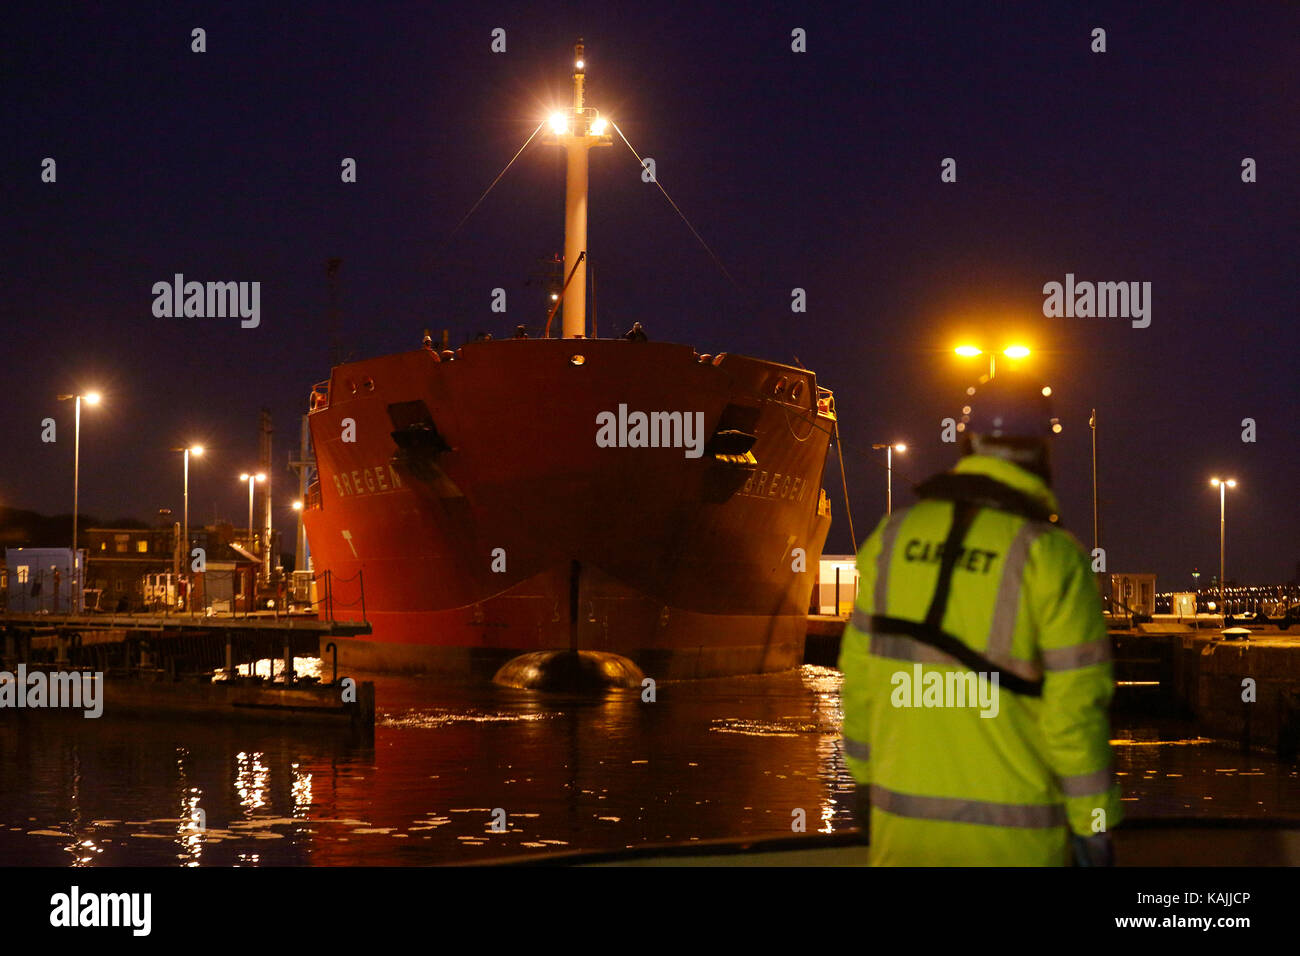 'Bregen' in the lock on the Manchester Ship Canal in NE England on April 2, 2013. Stock Photo